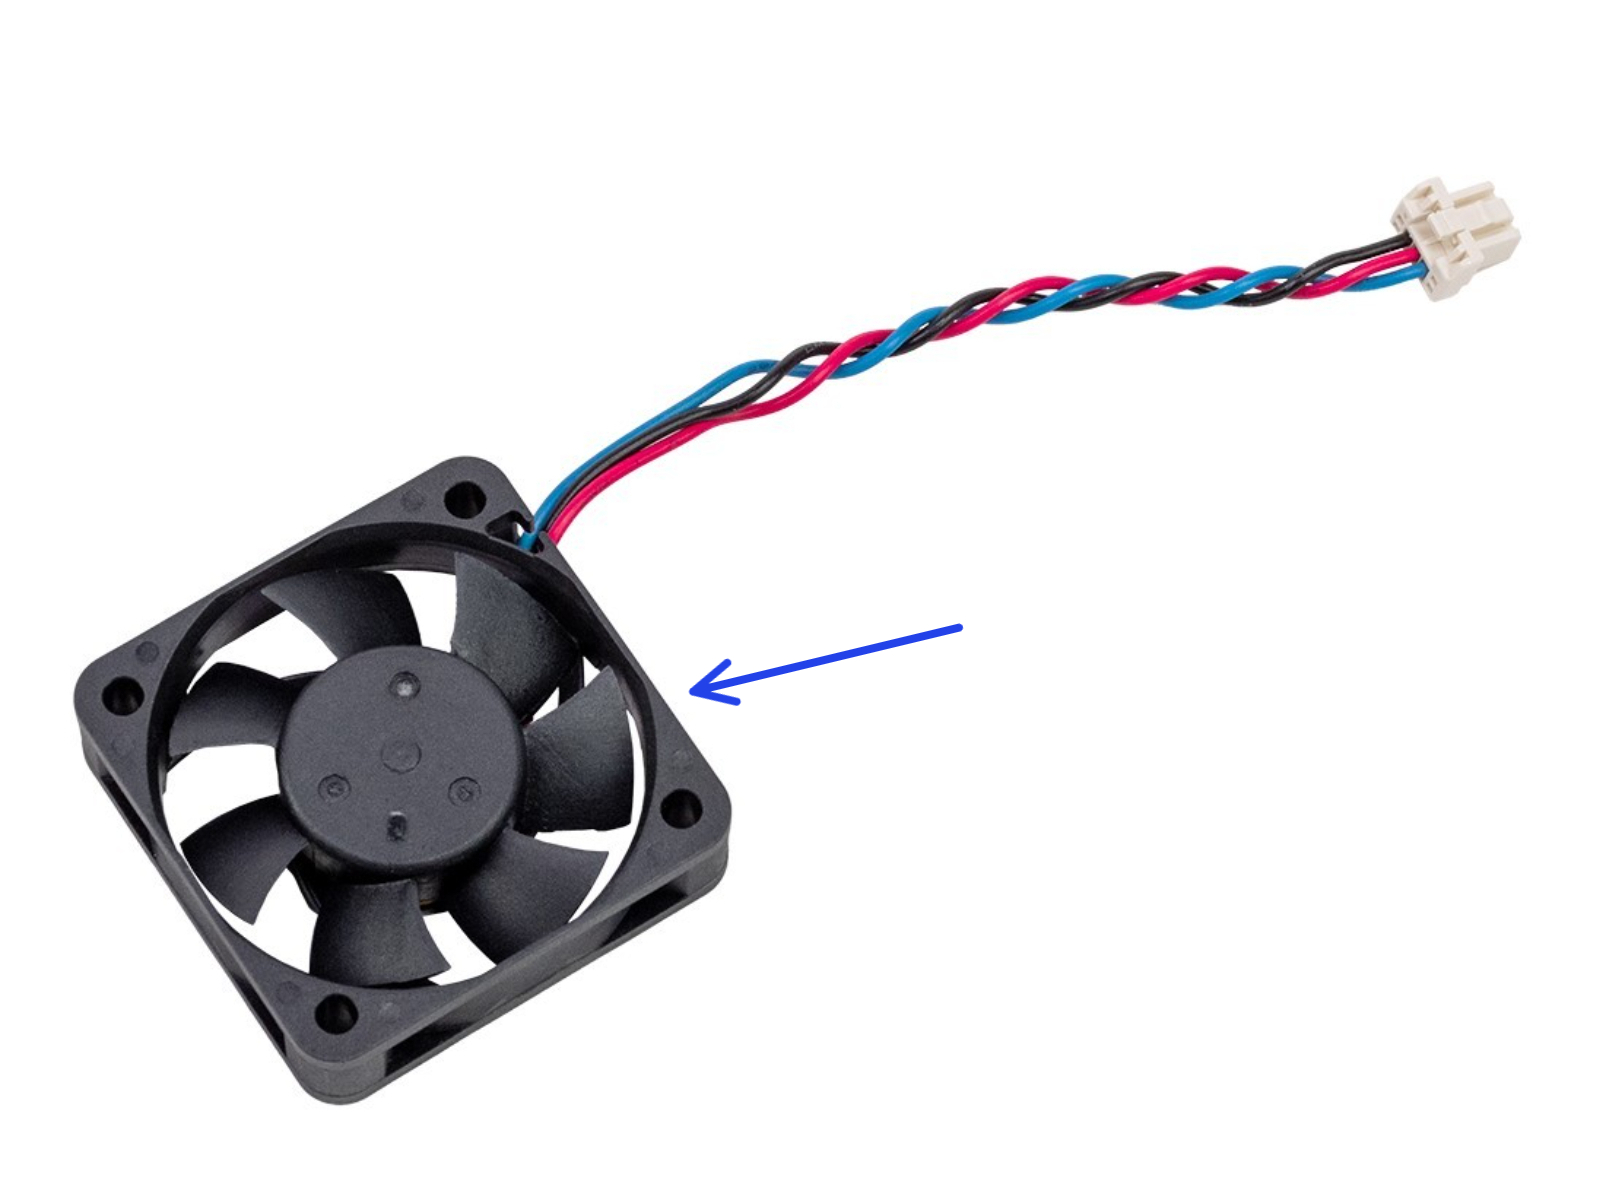 Mounting the hotend fan - preparation